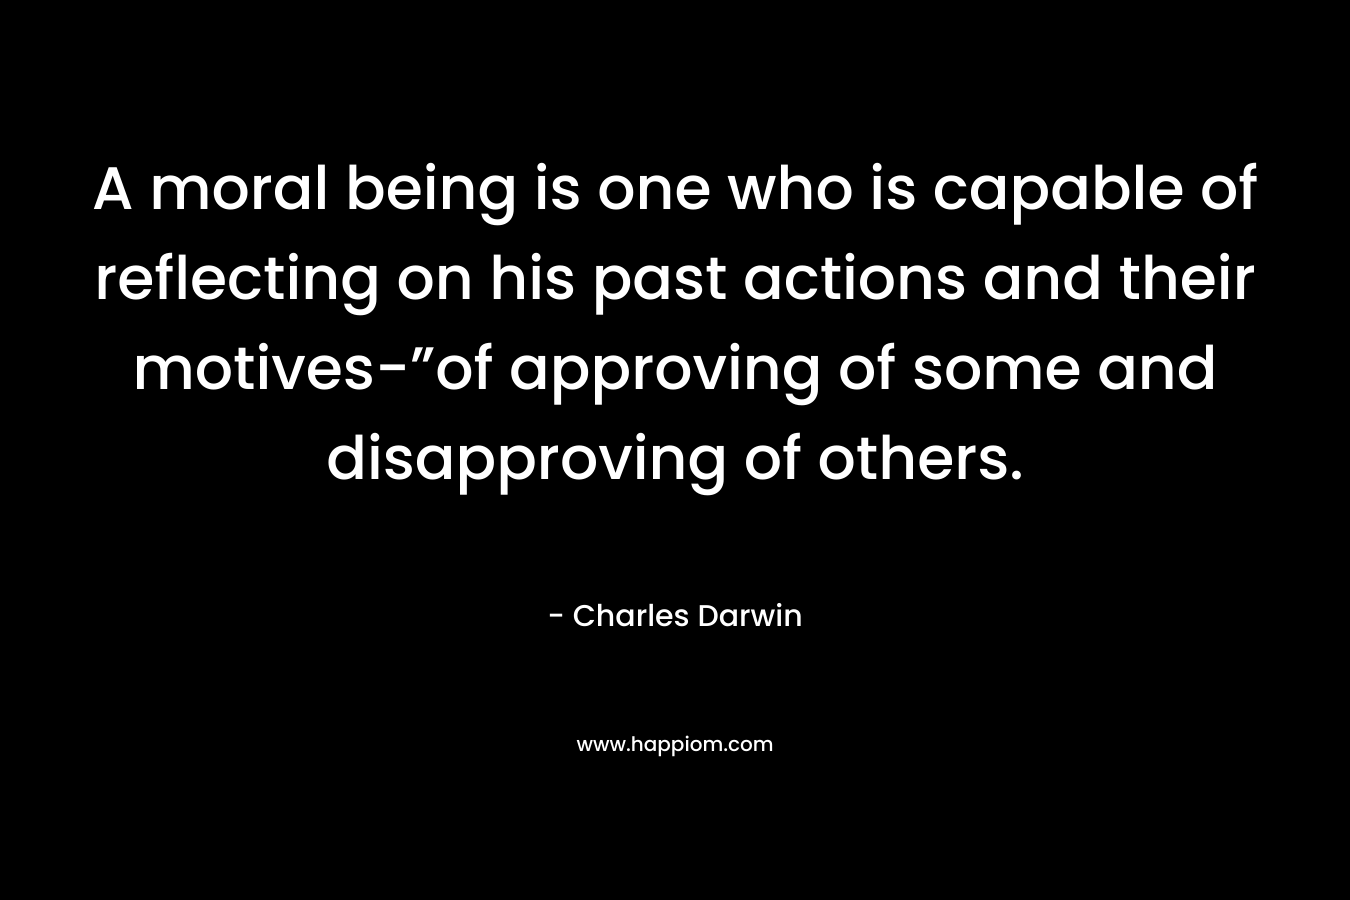 A moral being is one who is capable of reflecting on his past actions and their motives-”of approving of some and disapproving of others.